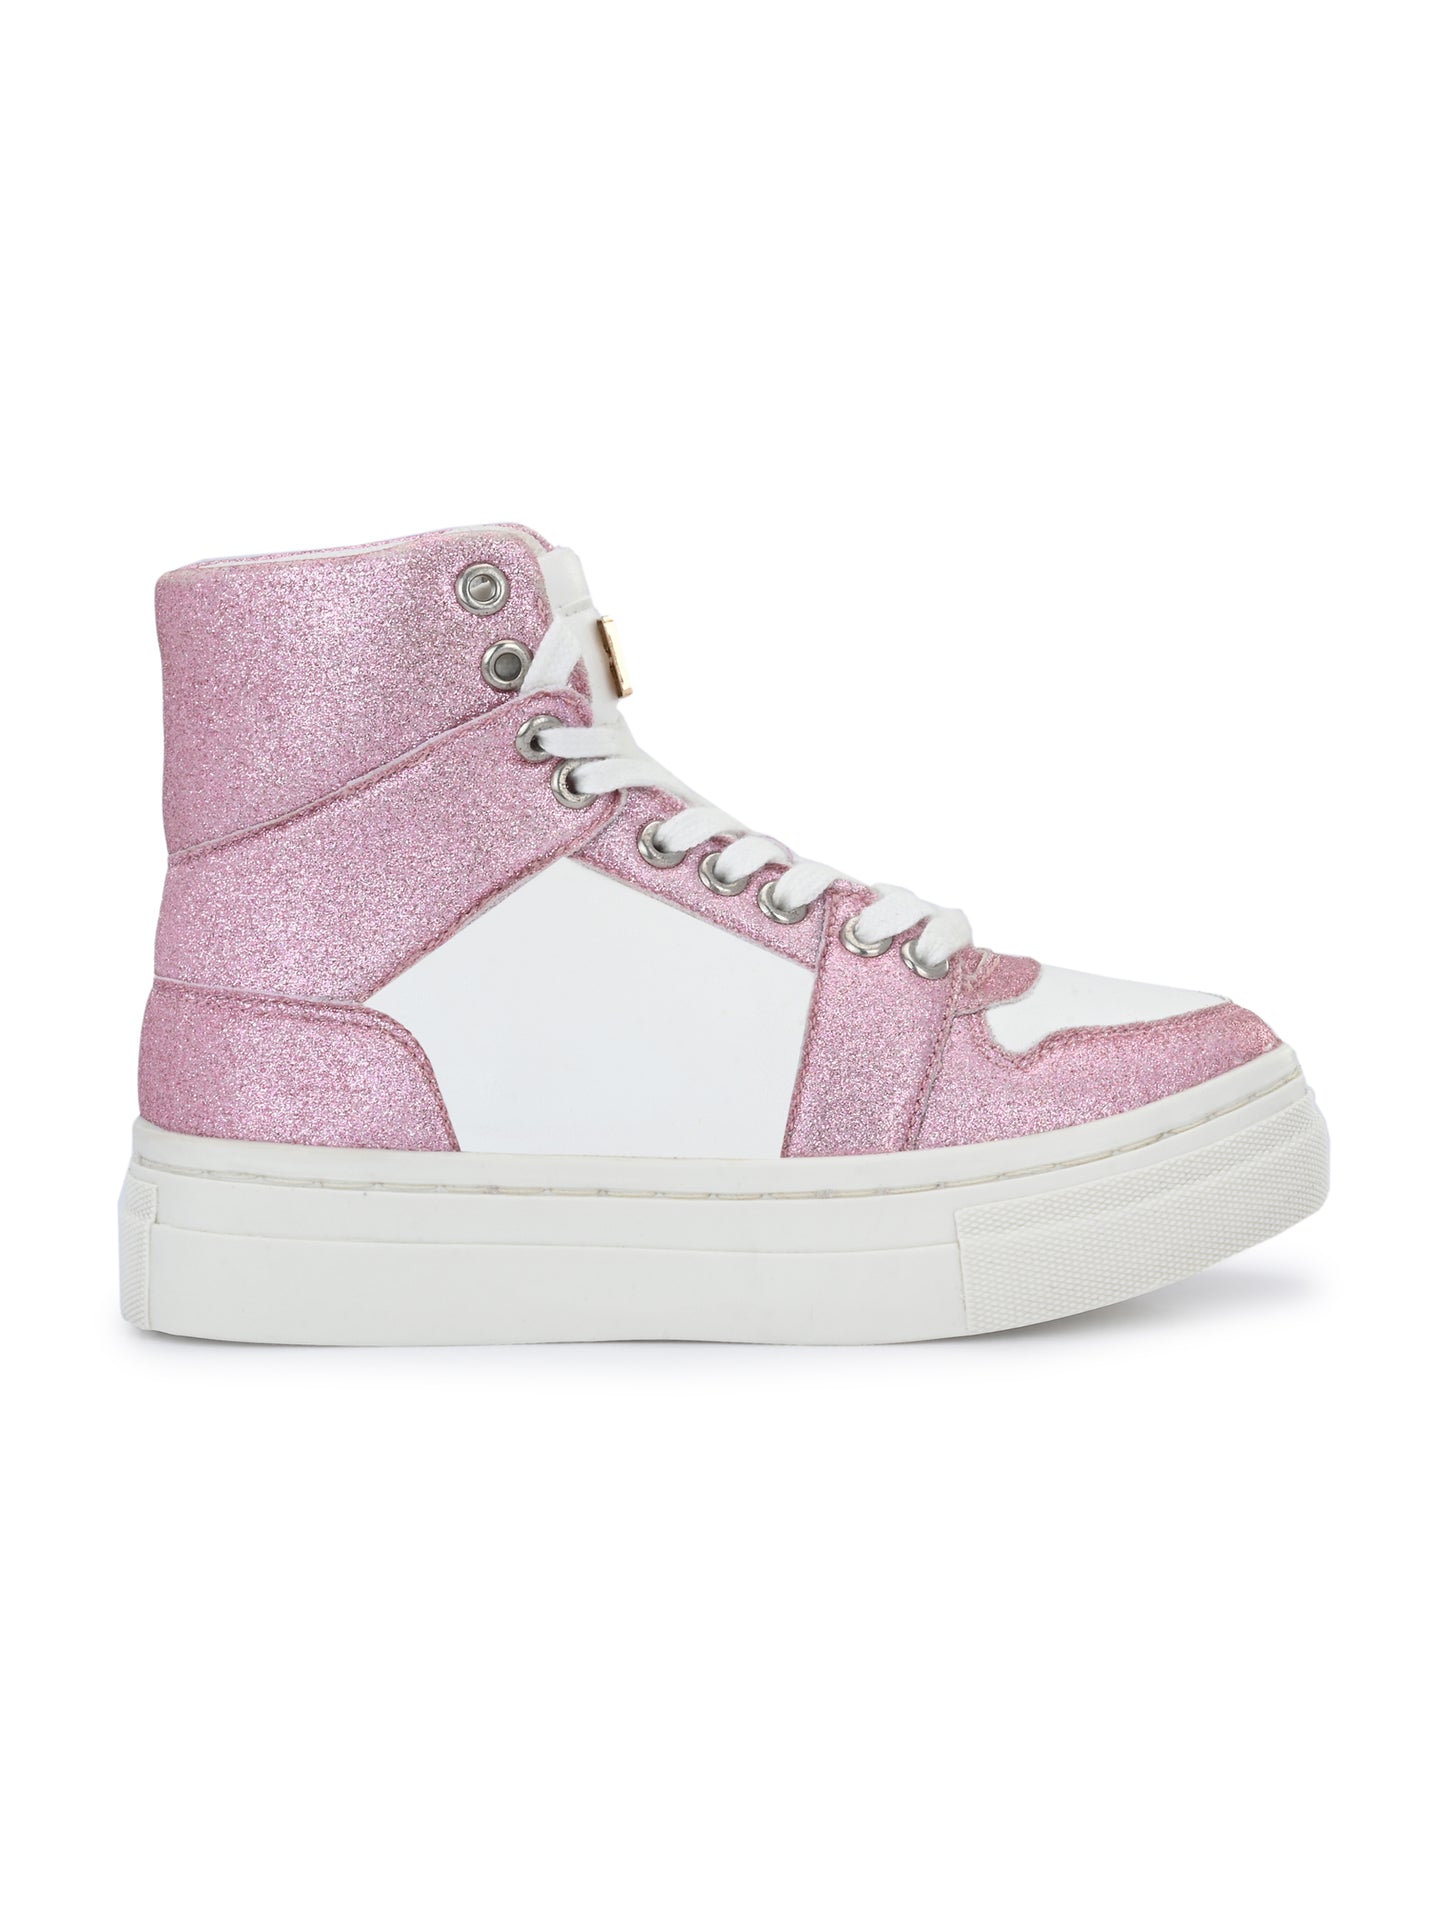 Nick Pink White Shoes for Kids